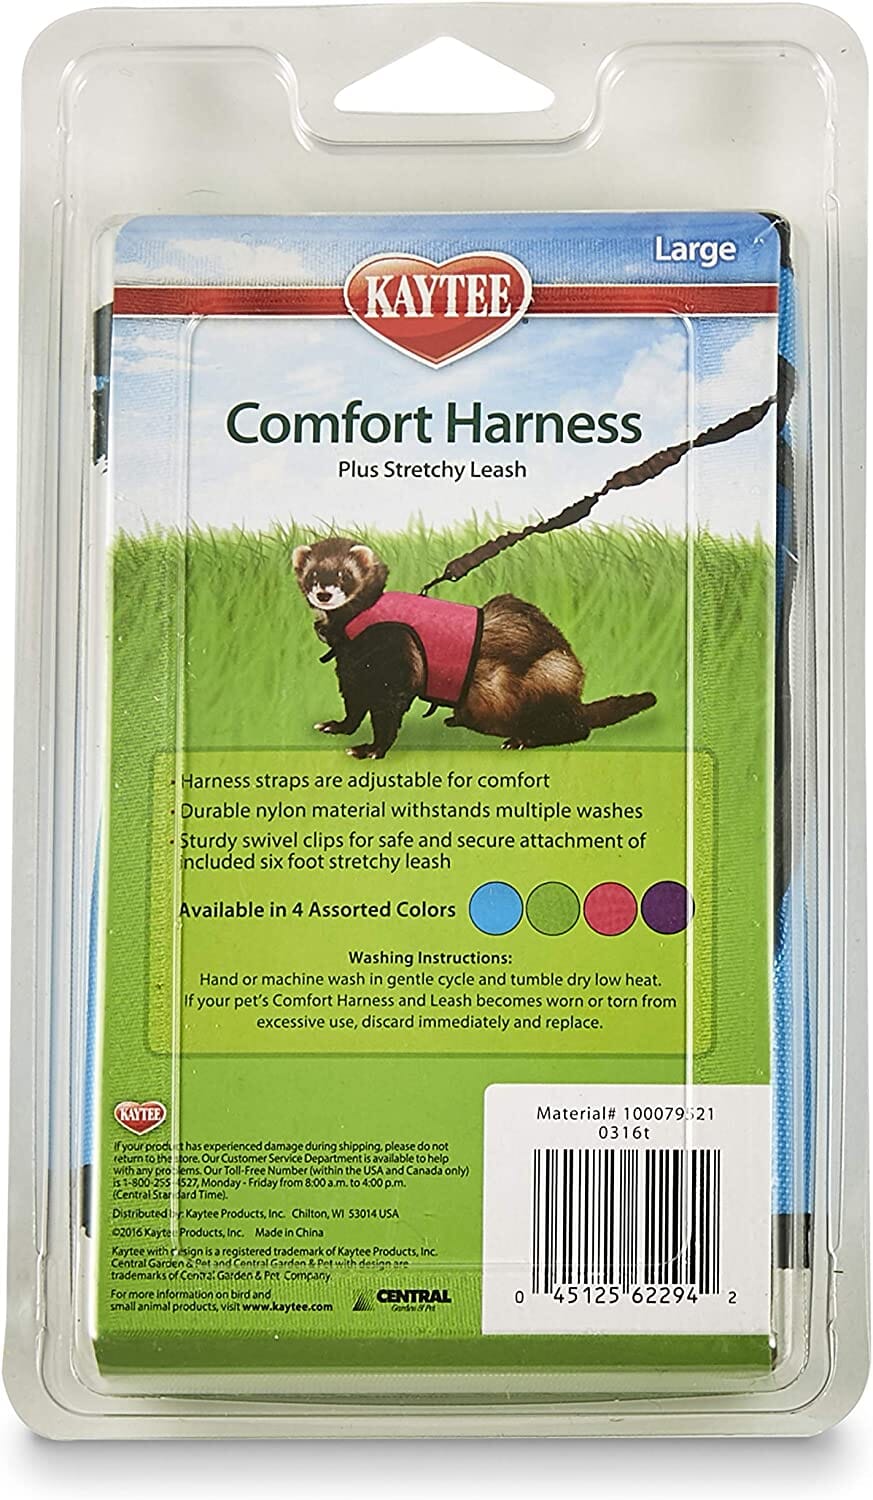 Kaytee Comfort Harness & Stretchy Leash Assorted - Large  